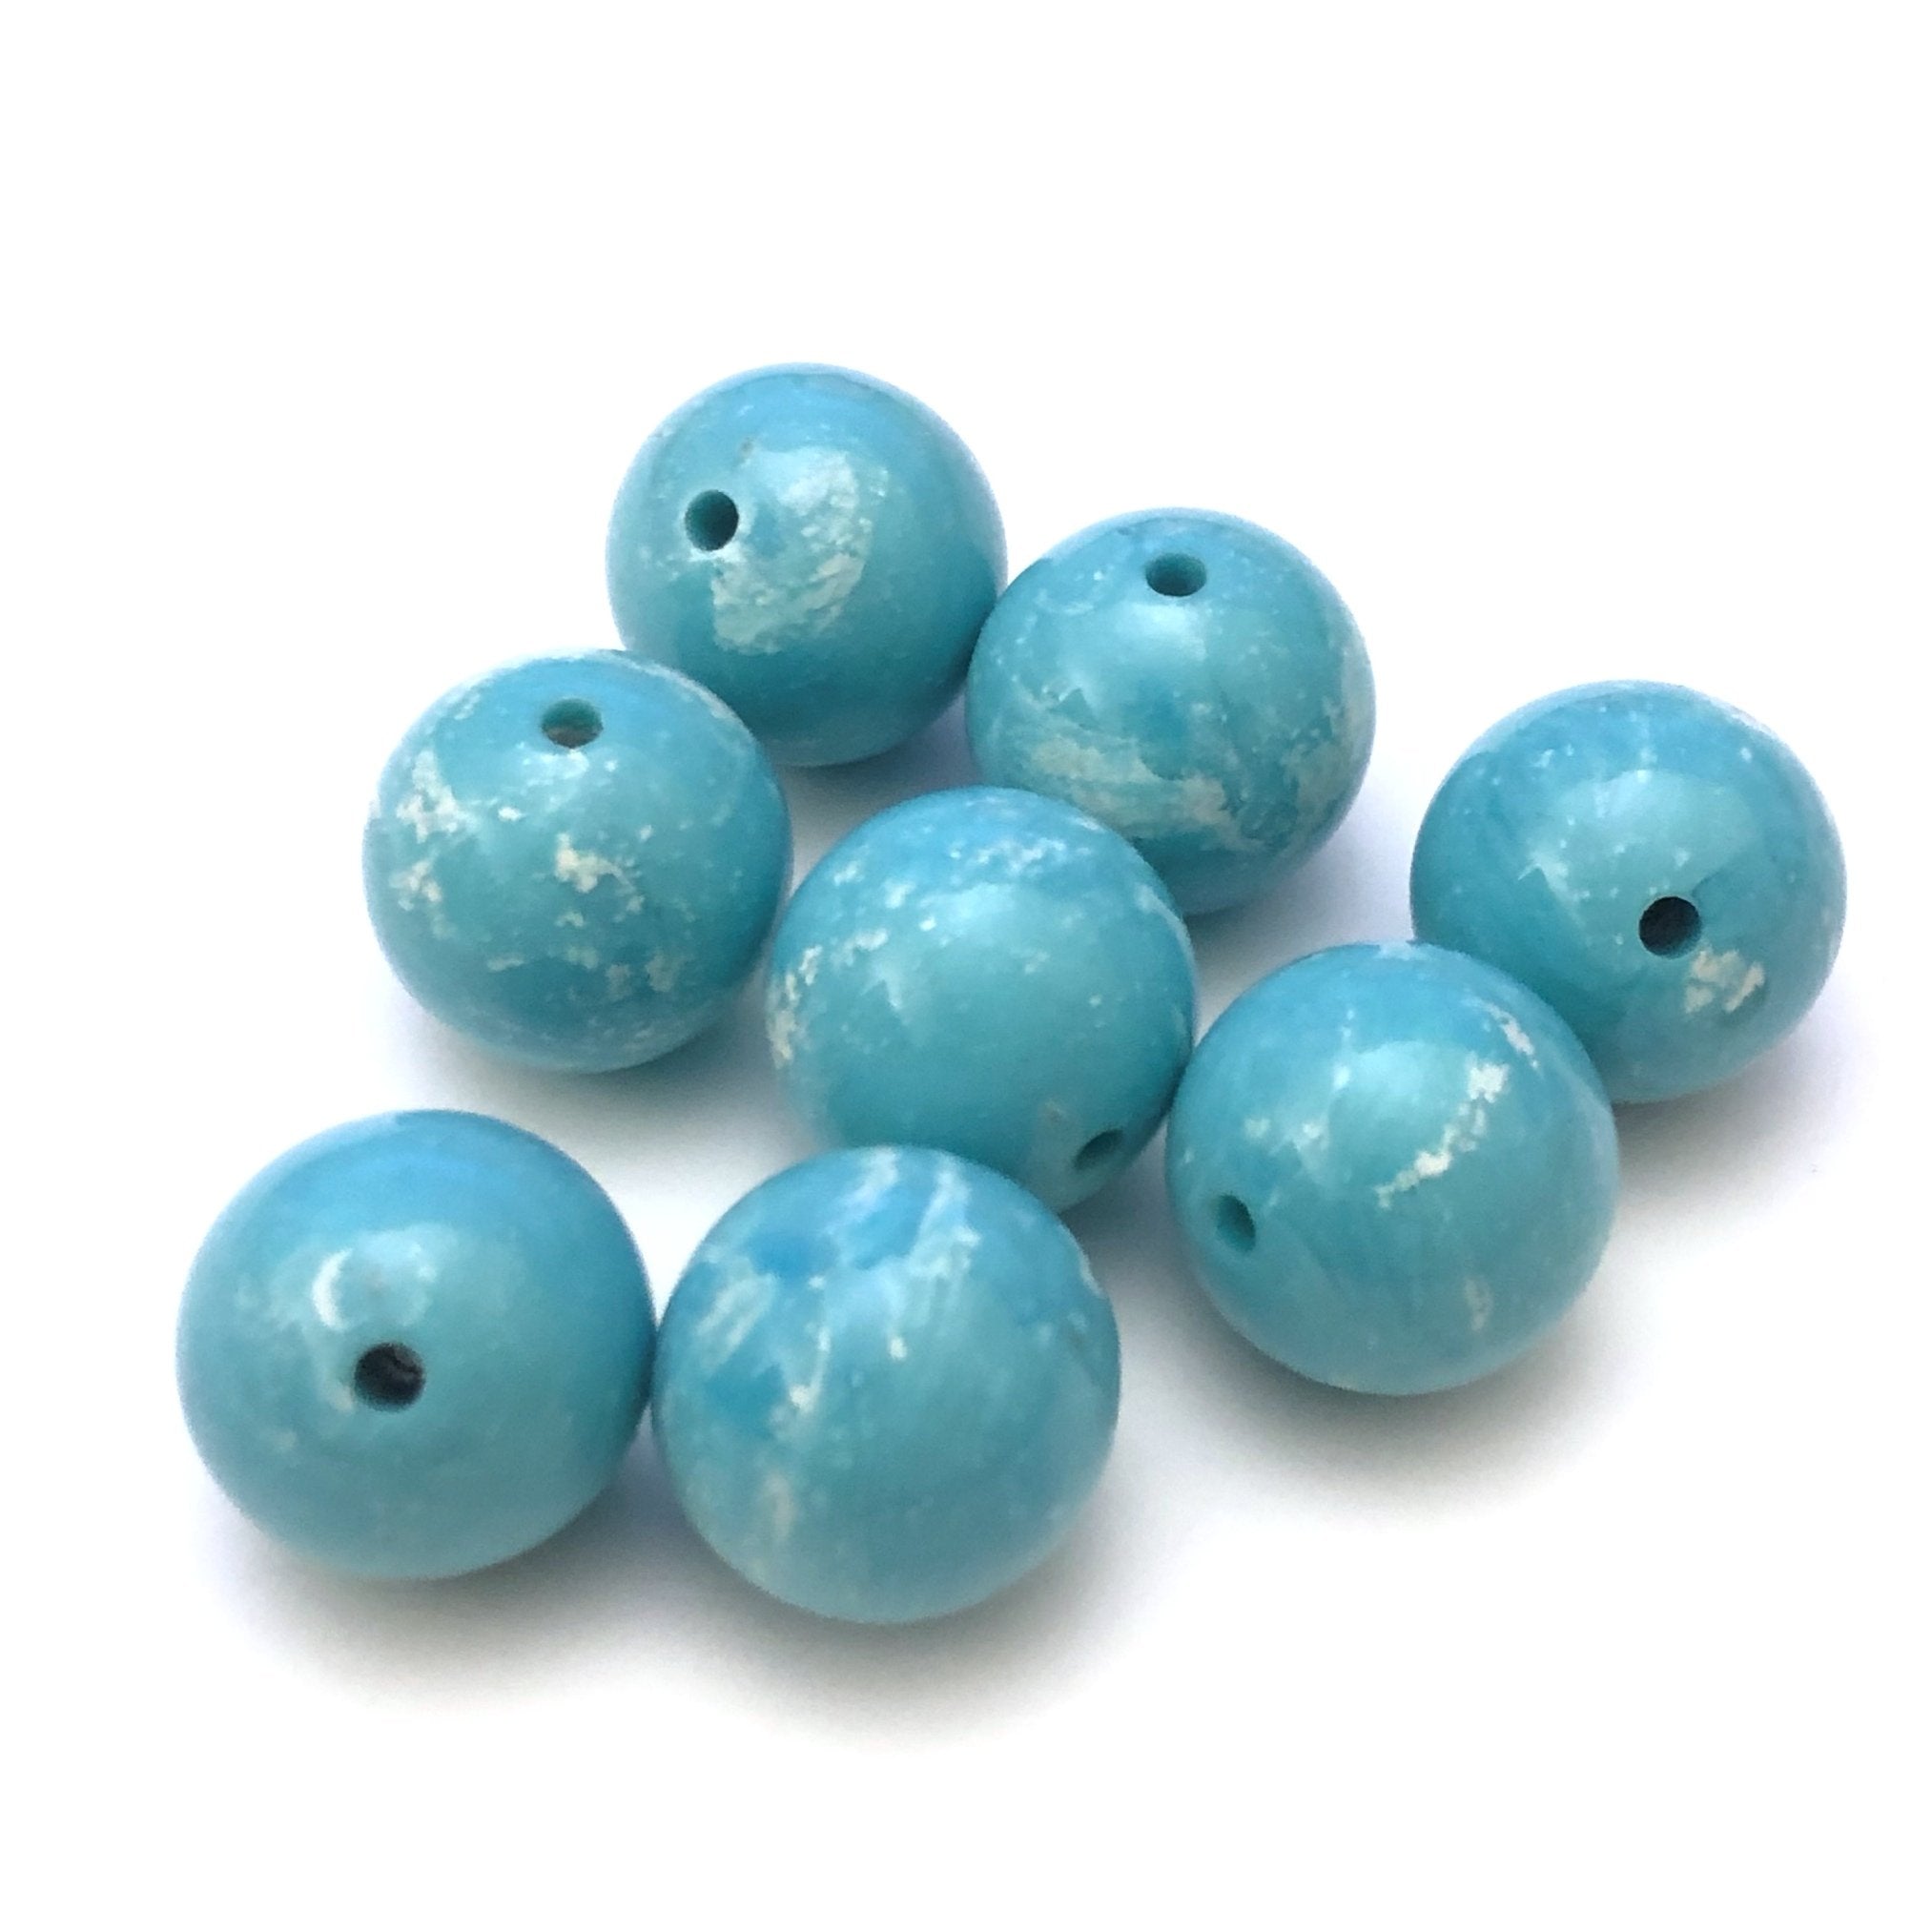 4MM Turquoise "Granite" Beads (720 pieces)